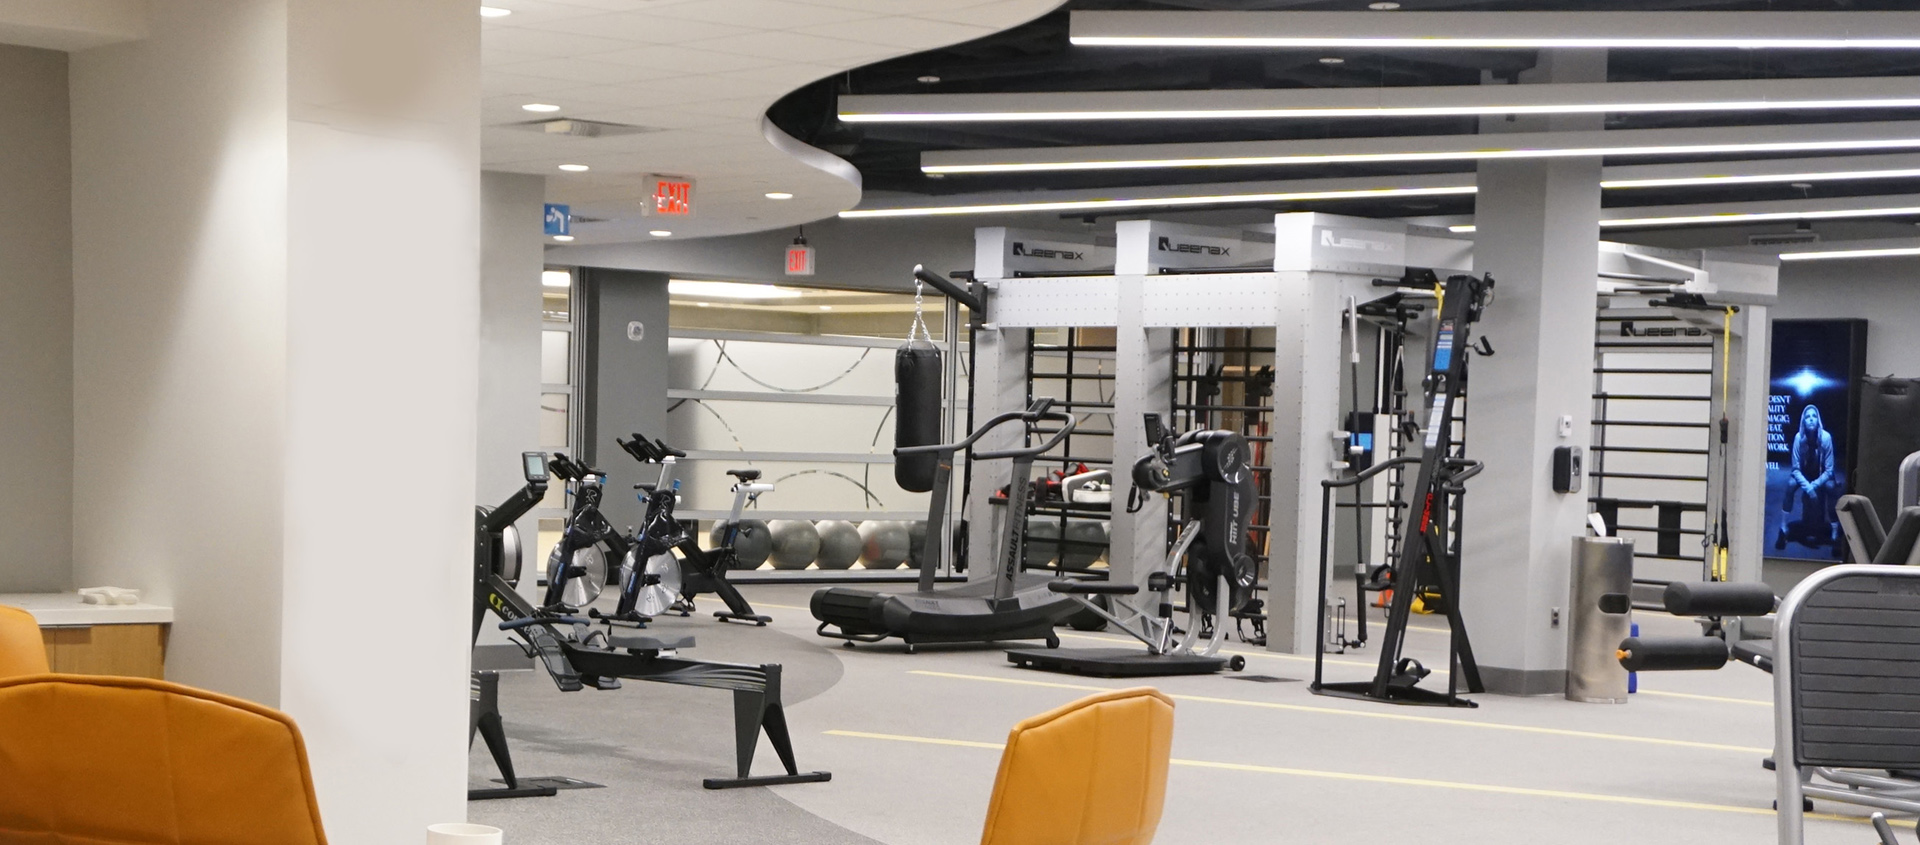 Ubs State Of The Art Fitness Center Utilizes Skyfold Mirage Vertical